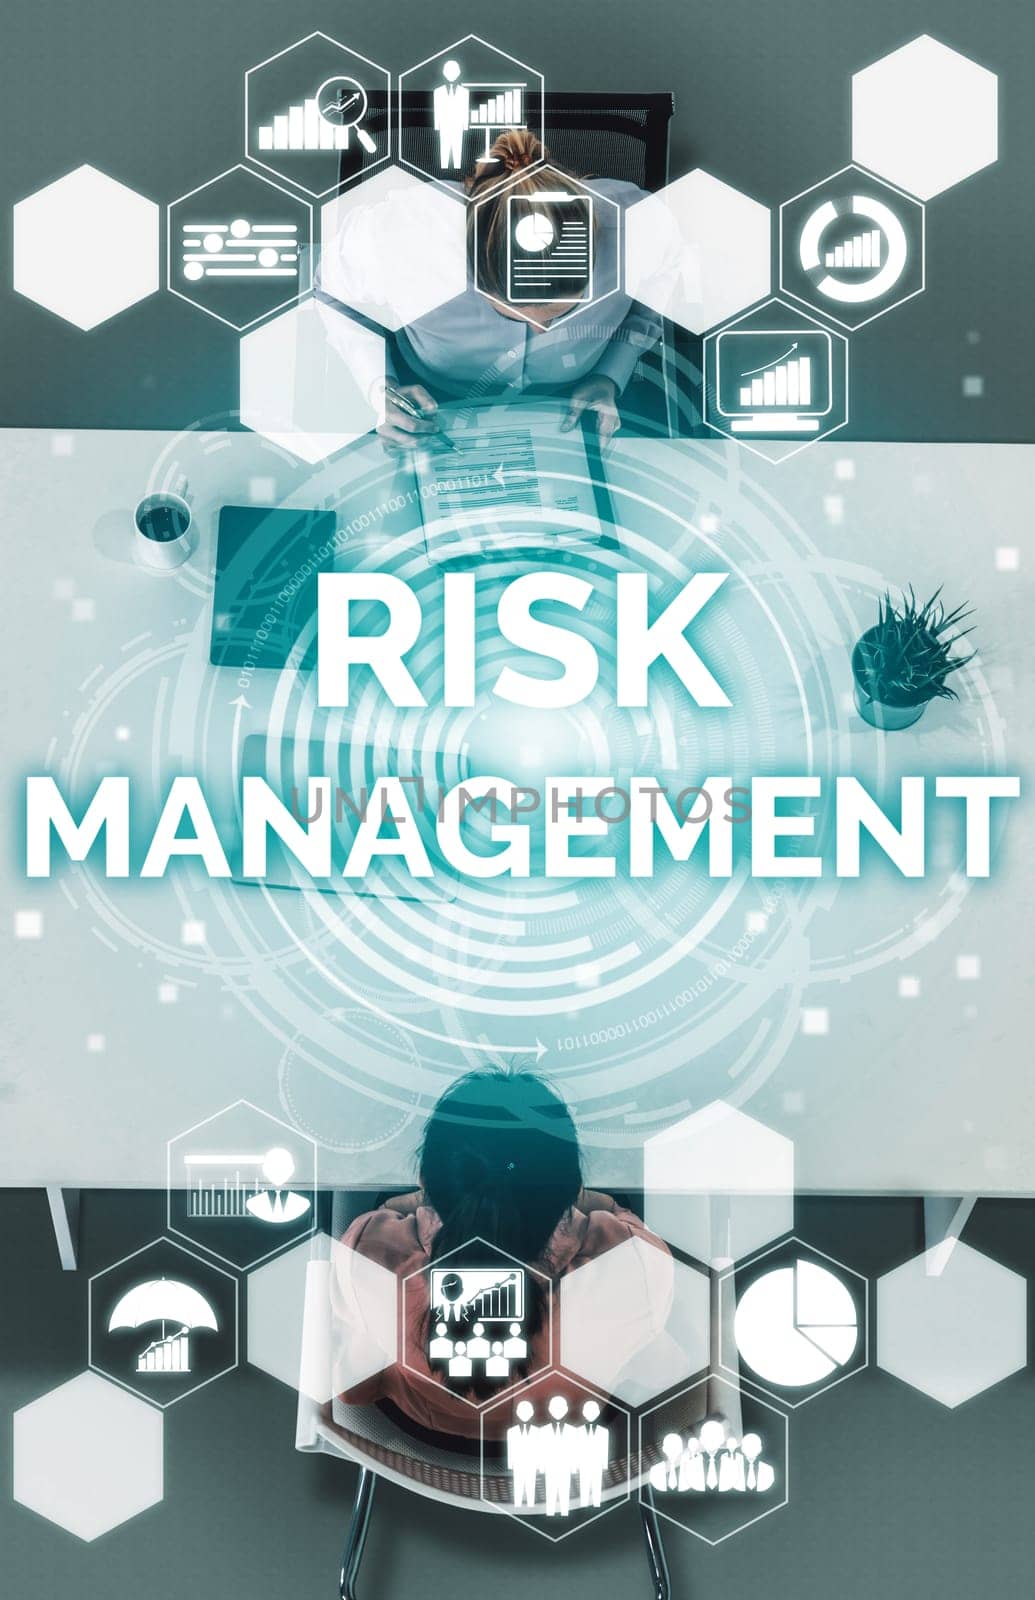 Risk Management and Assessment for Business Investment Concept. Modern interface showing symbols of strategy in risky plan analysis to control unpredictable loss and build financial safety. uds